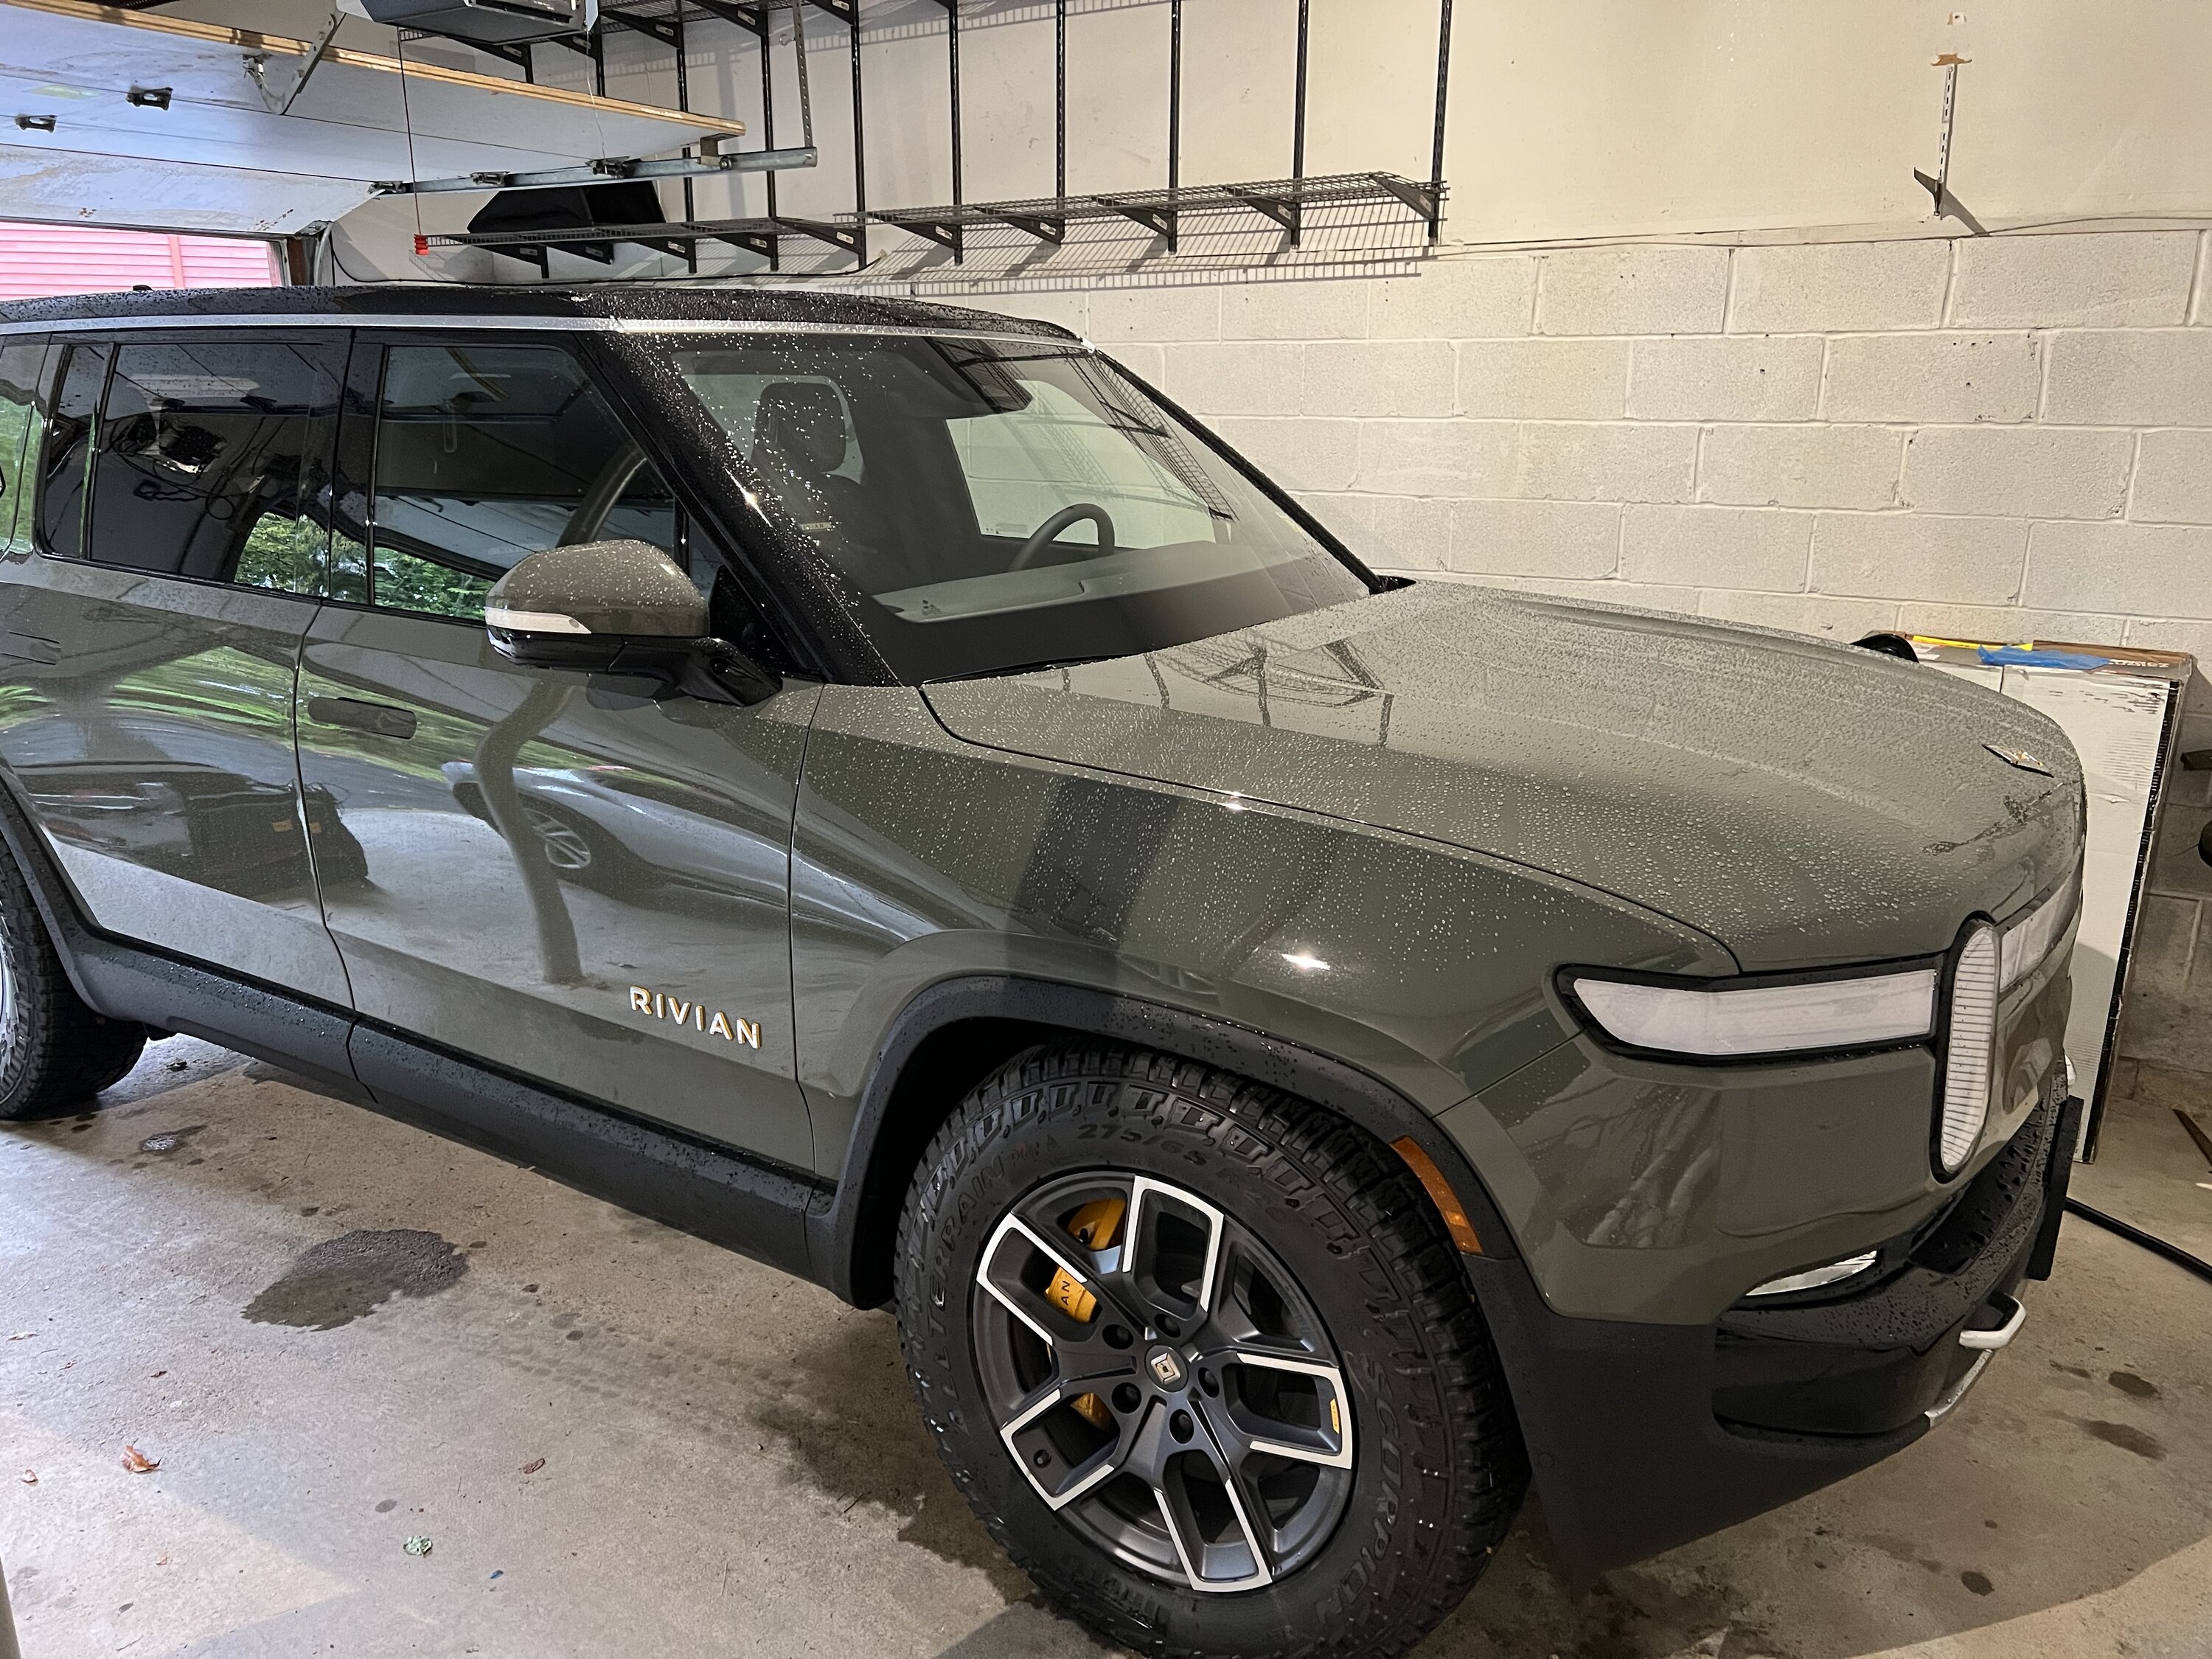 Rivian R1T R1S Any R1S pre-orders hear from guides recently? 7B7DA7C4-18C3-406E-B0AF-150F583CA711